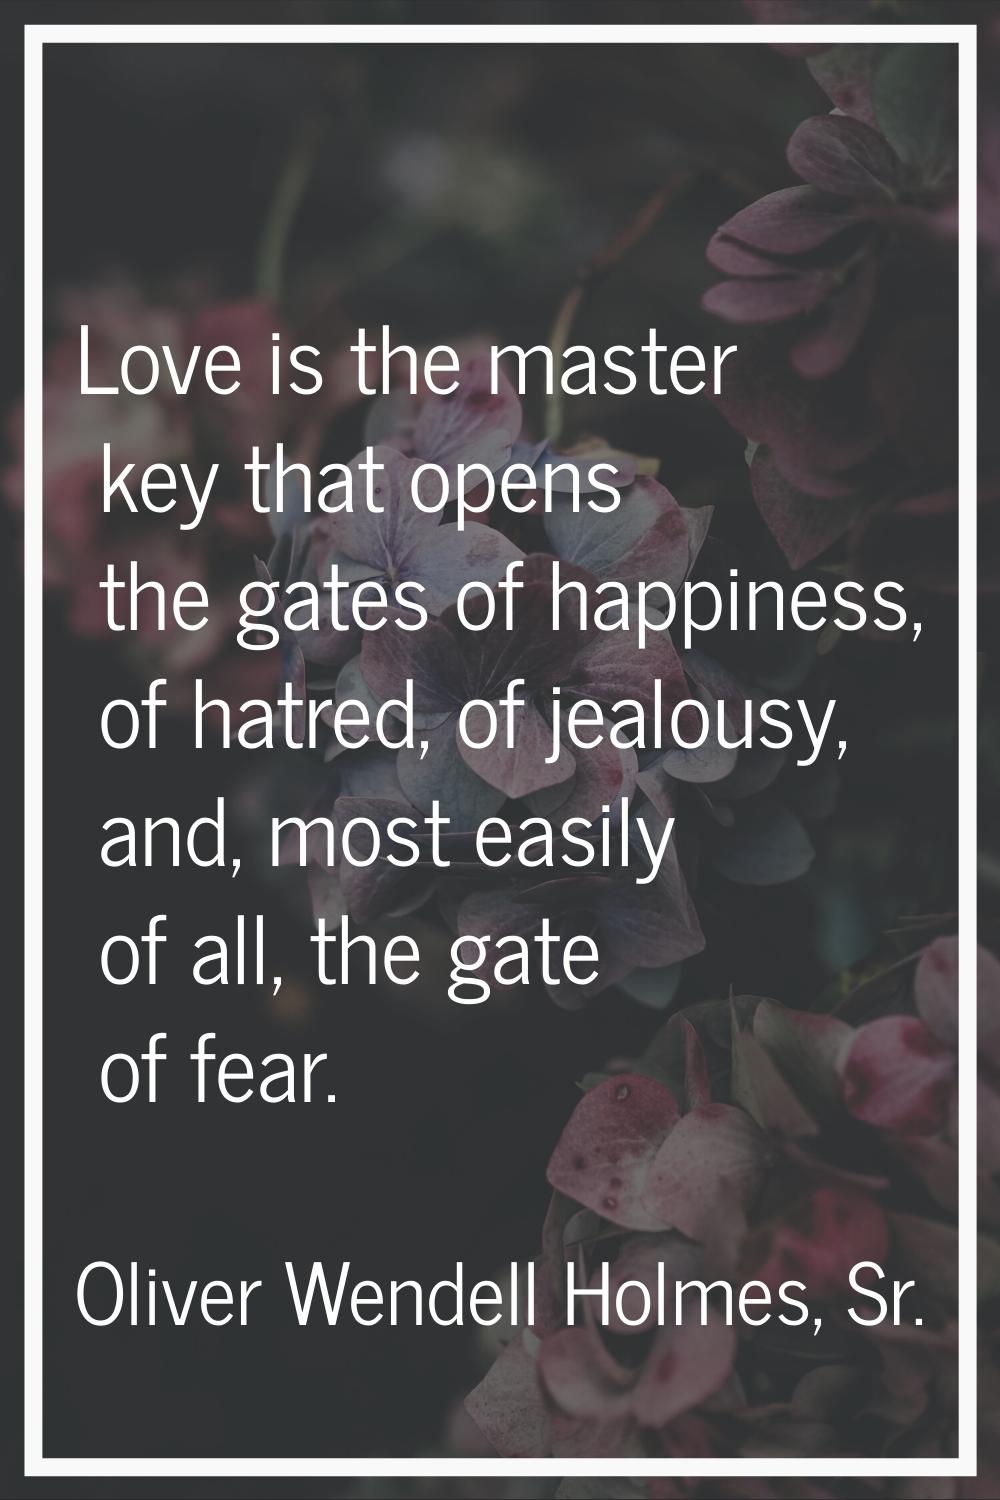 Love is the master key that opens the gates of happiness, of hatred, of jealousy, and, most easily 